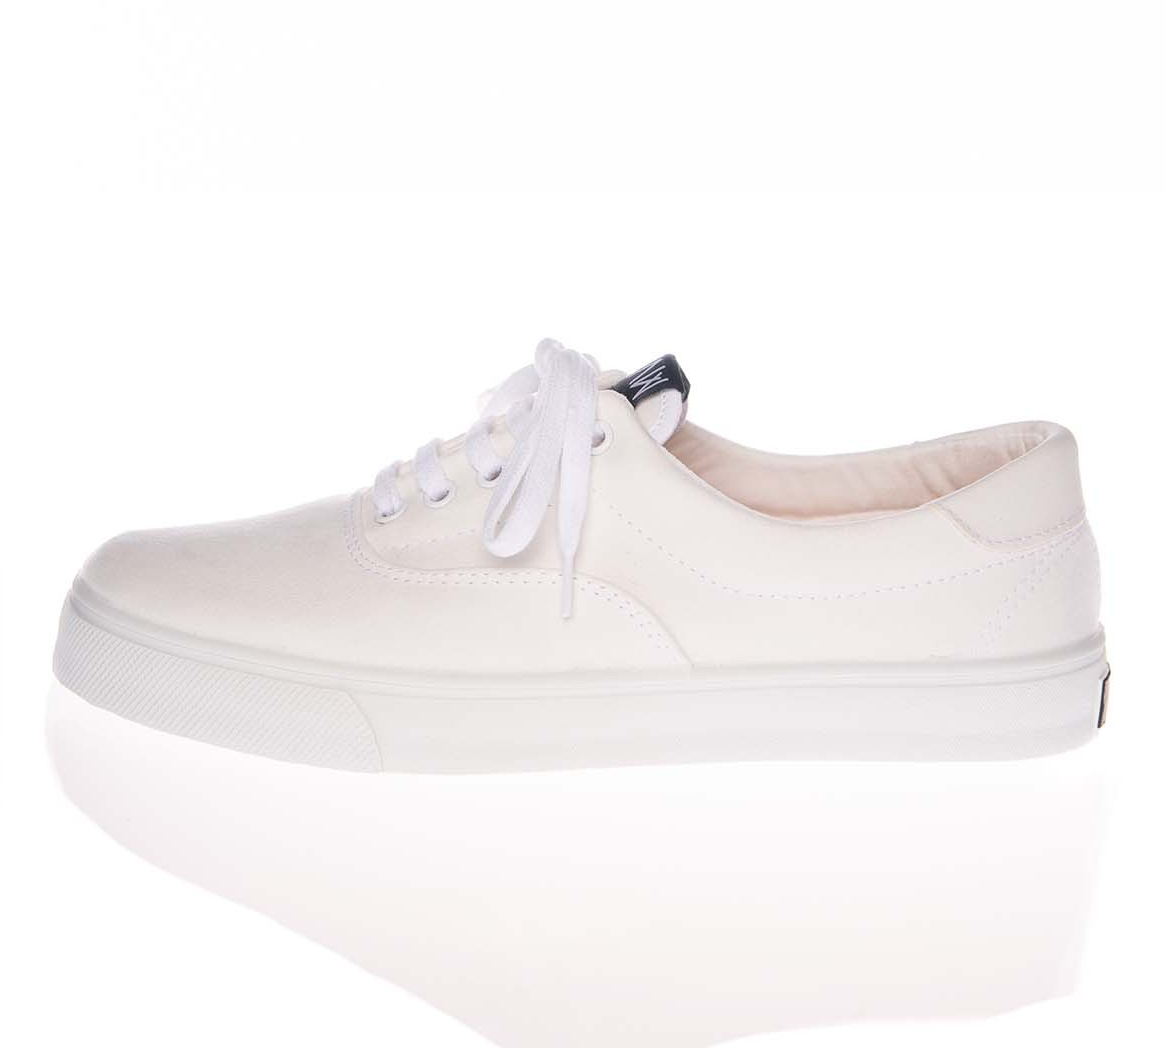 Wasted Shoes - Montecito White en Blanc